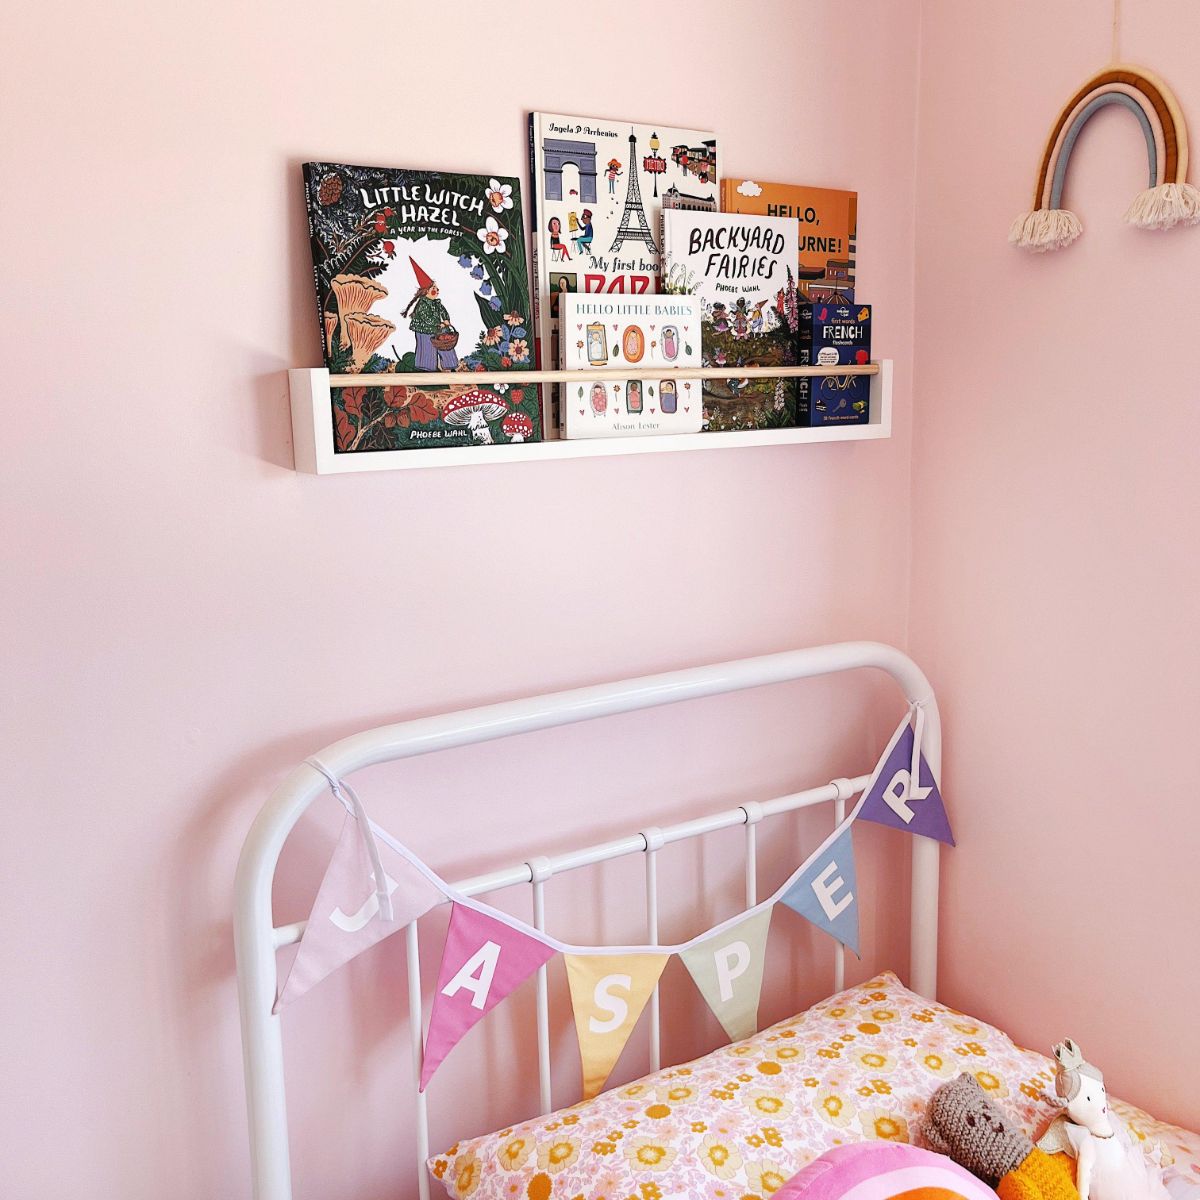 This is a 80cm white bookshelf with wooden peg across. It is placed on top of a bed with a pink wall as a background